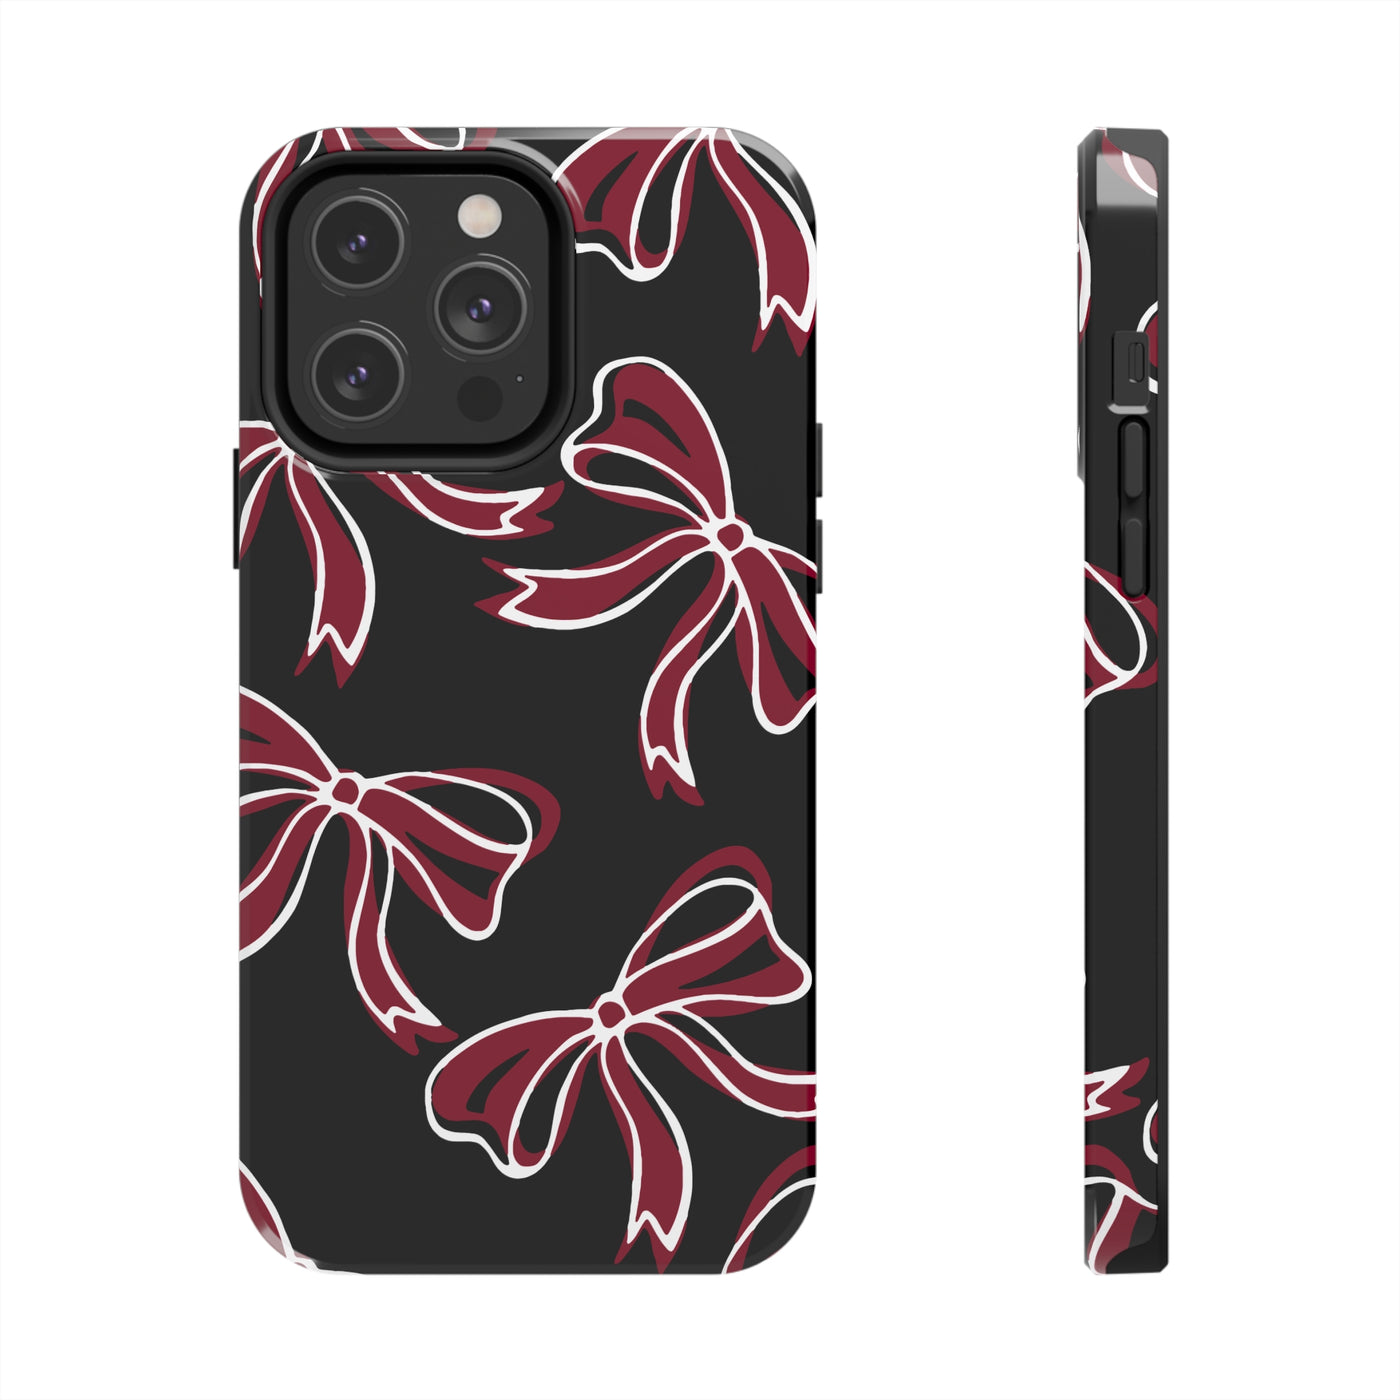 Trendy Bow Phone Case, Bed Party Bow Iphone case, Bow Phone Case, - South Carolina, Gamecocks, USC, garnet and black